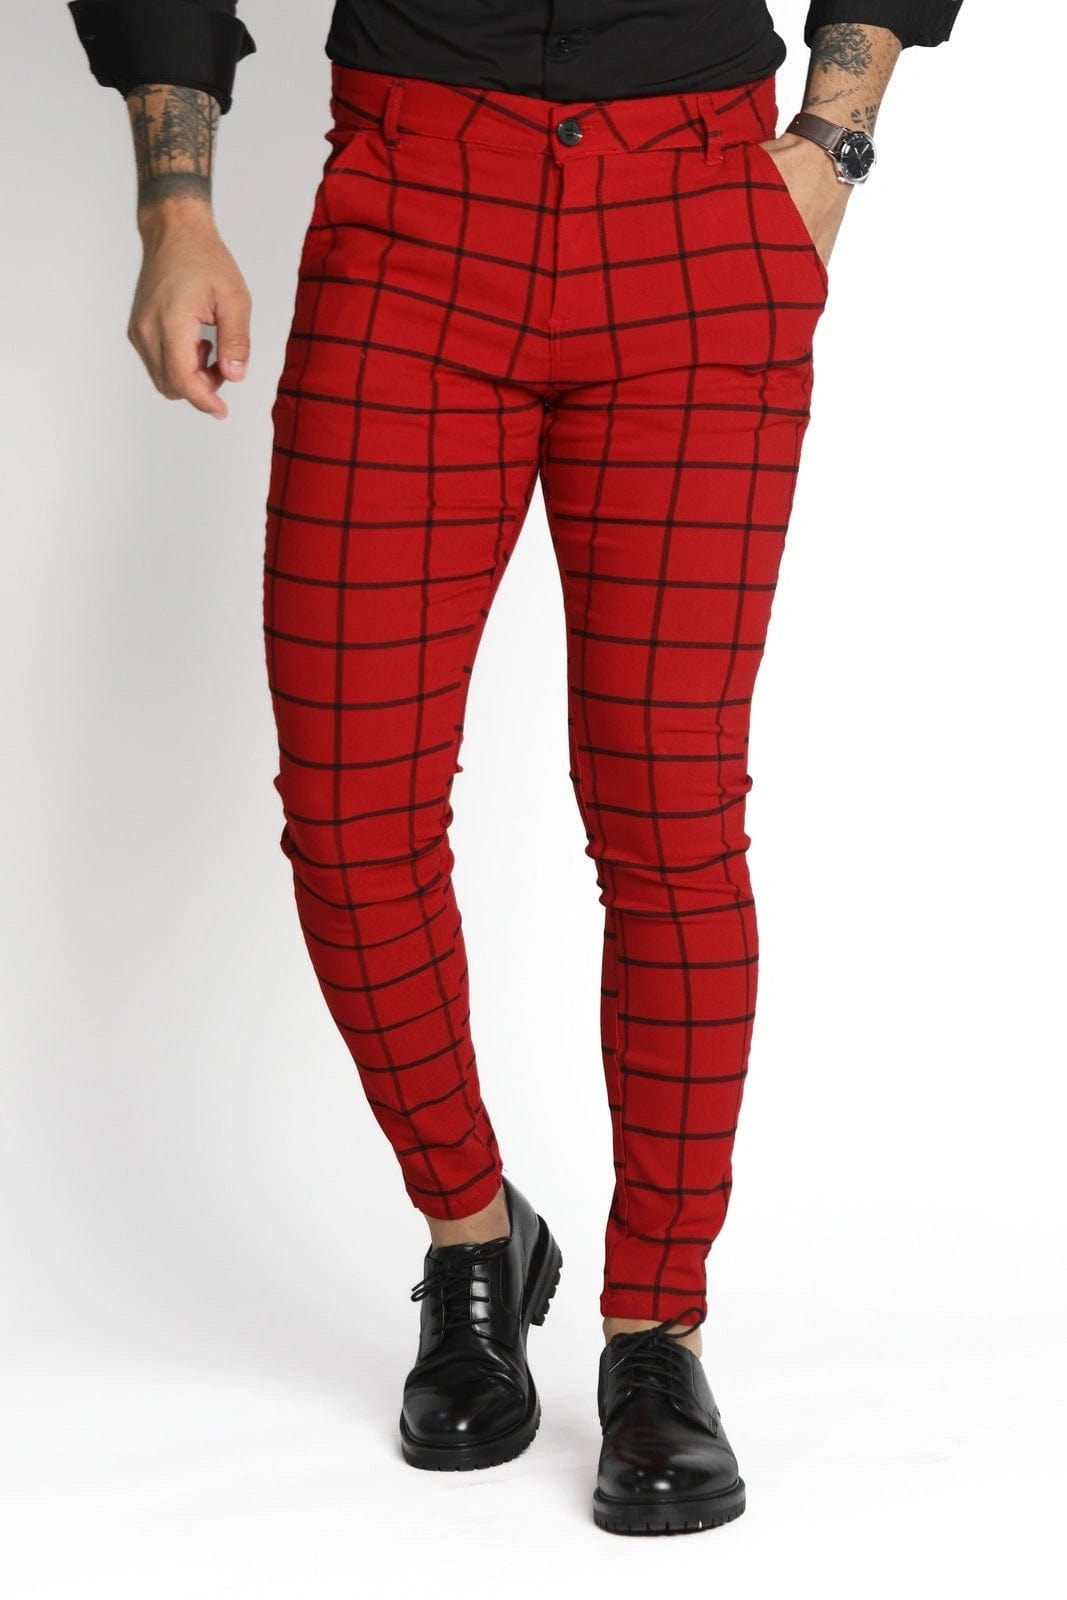 Mens Red Checkered Dress Pants